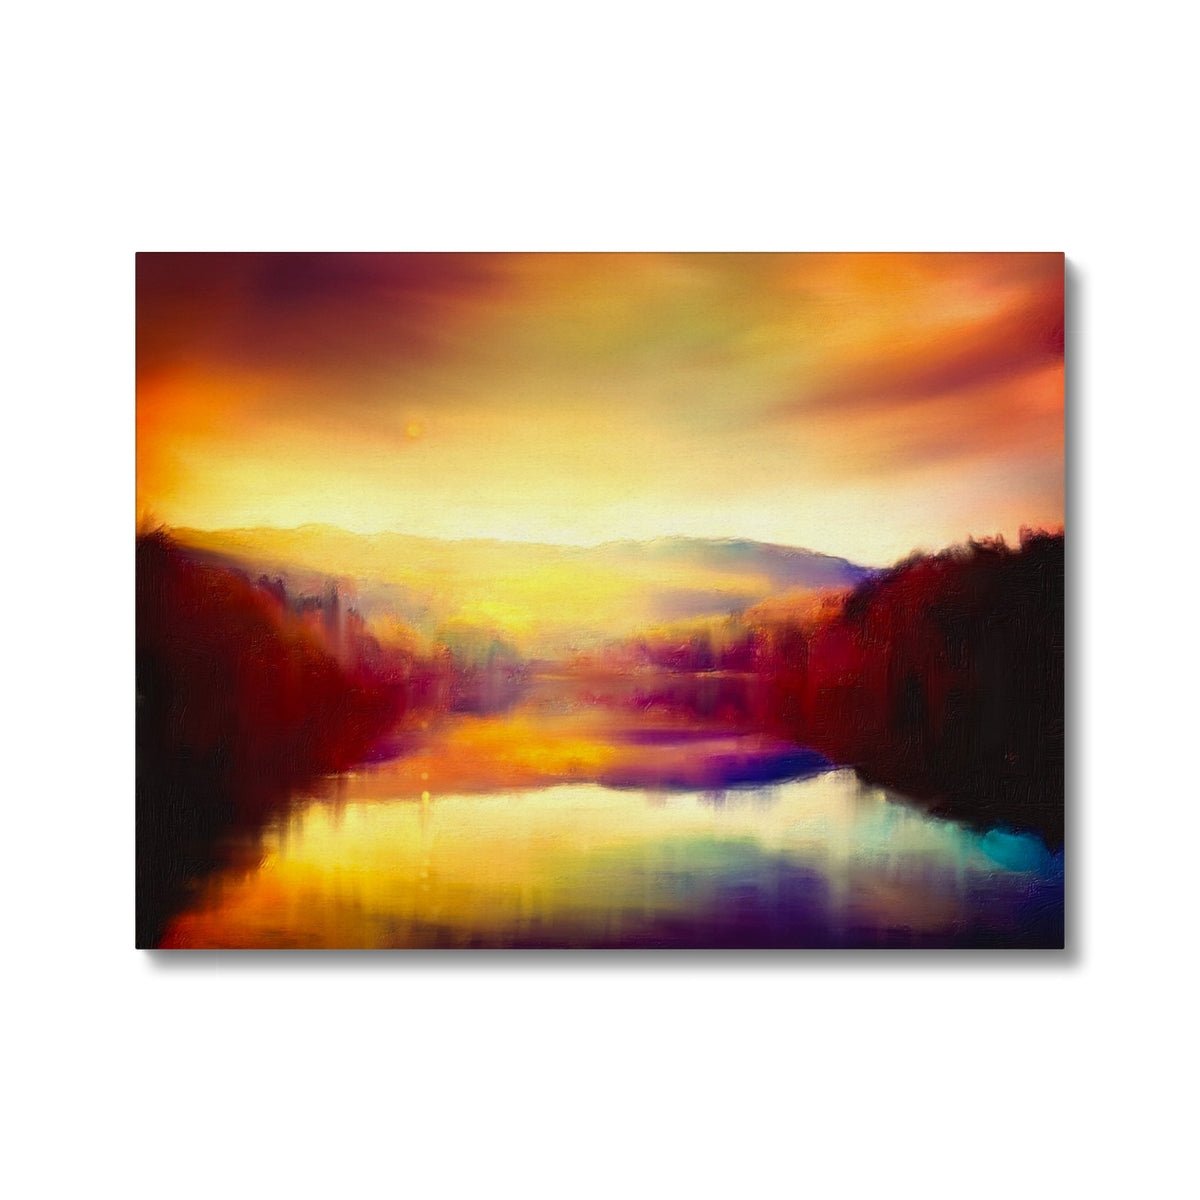 Loch Faskally Dusk Painting | Canvas From Scotland-Contemporary Stretched Canvas Prints-Scottish Lochs & Mountains Art Gallery-24"x18"-Paintings, Prints, Homeware, Art Gifts From Scotland By Scottish Artist Kevin Hunter